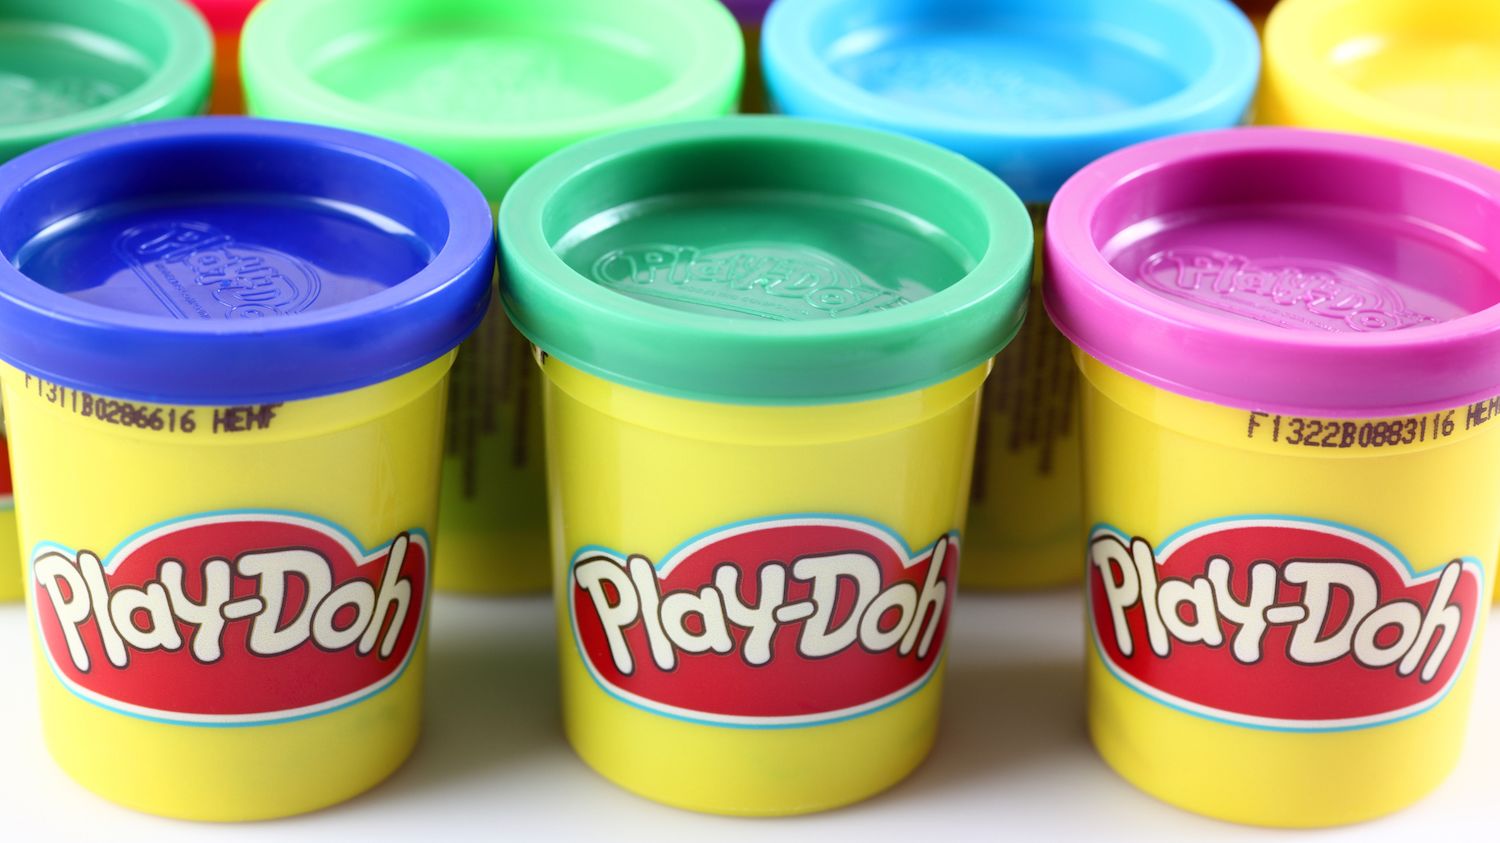 learn colors with 8 color play doh